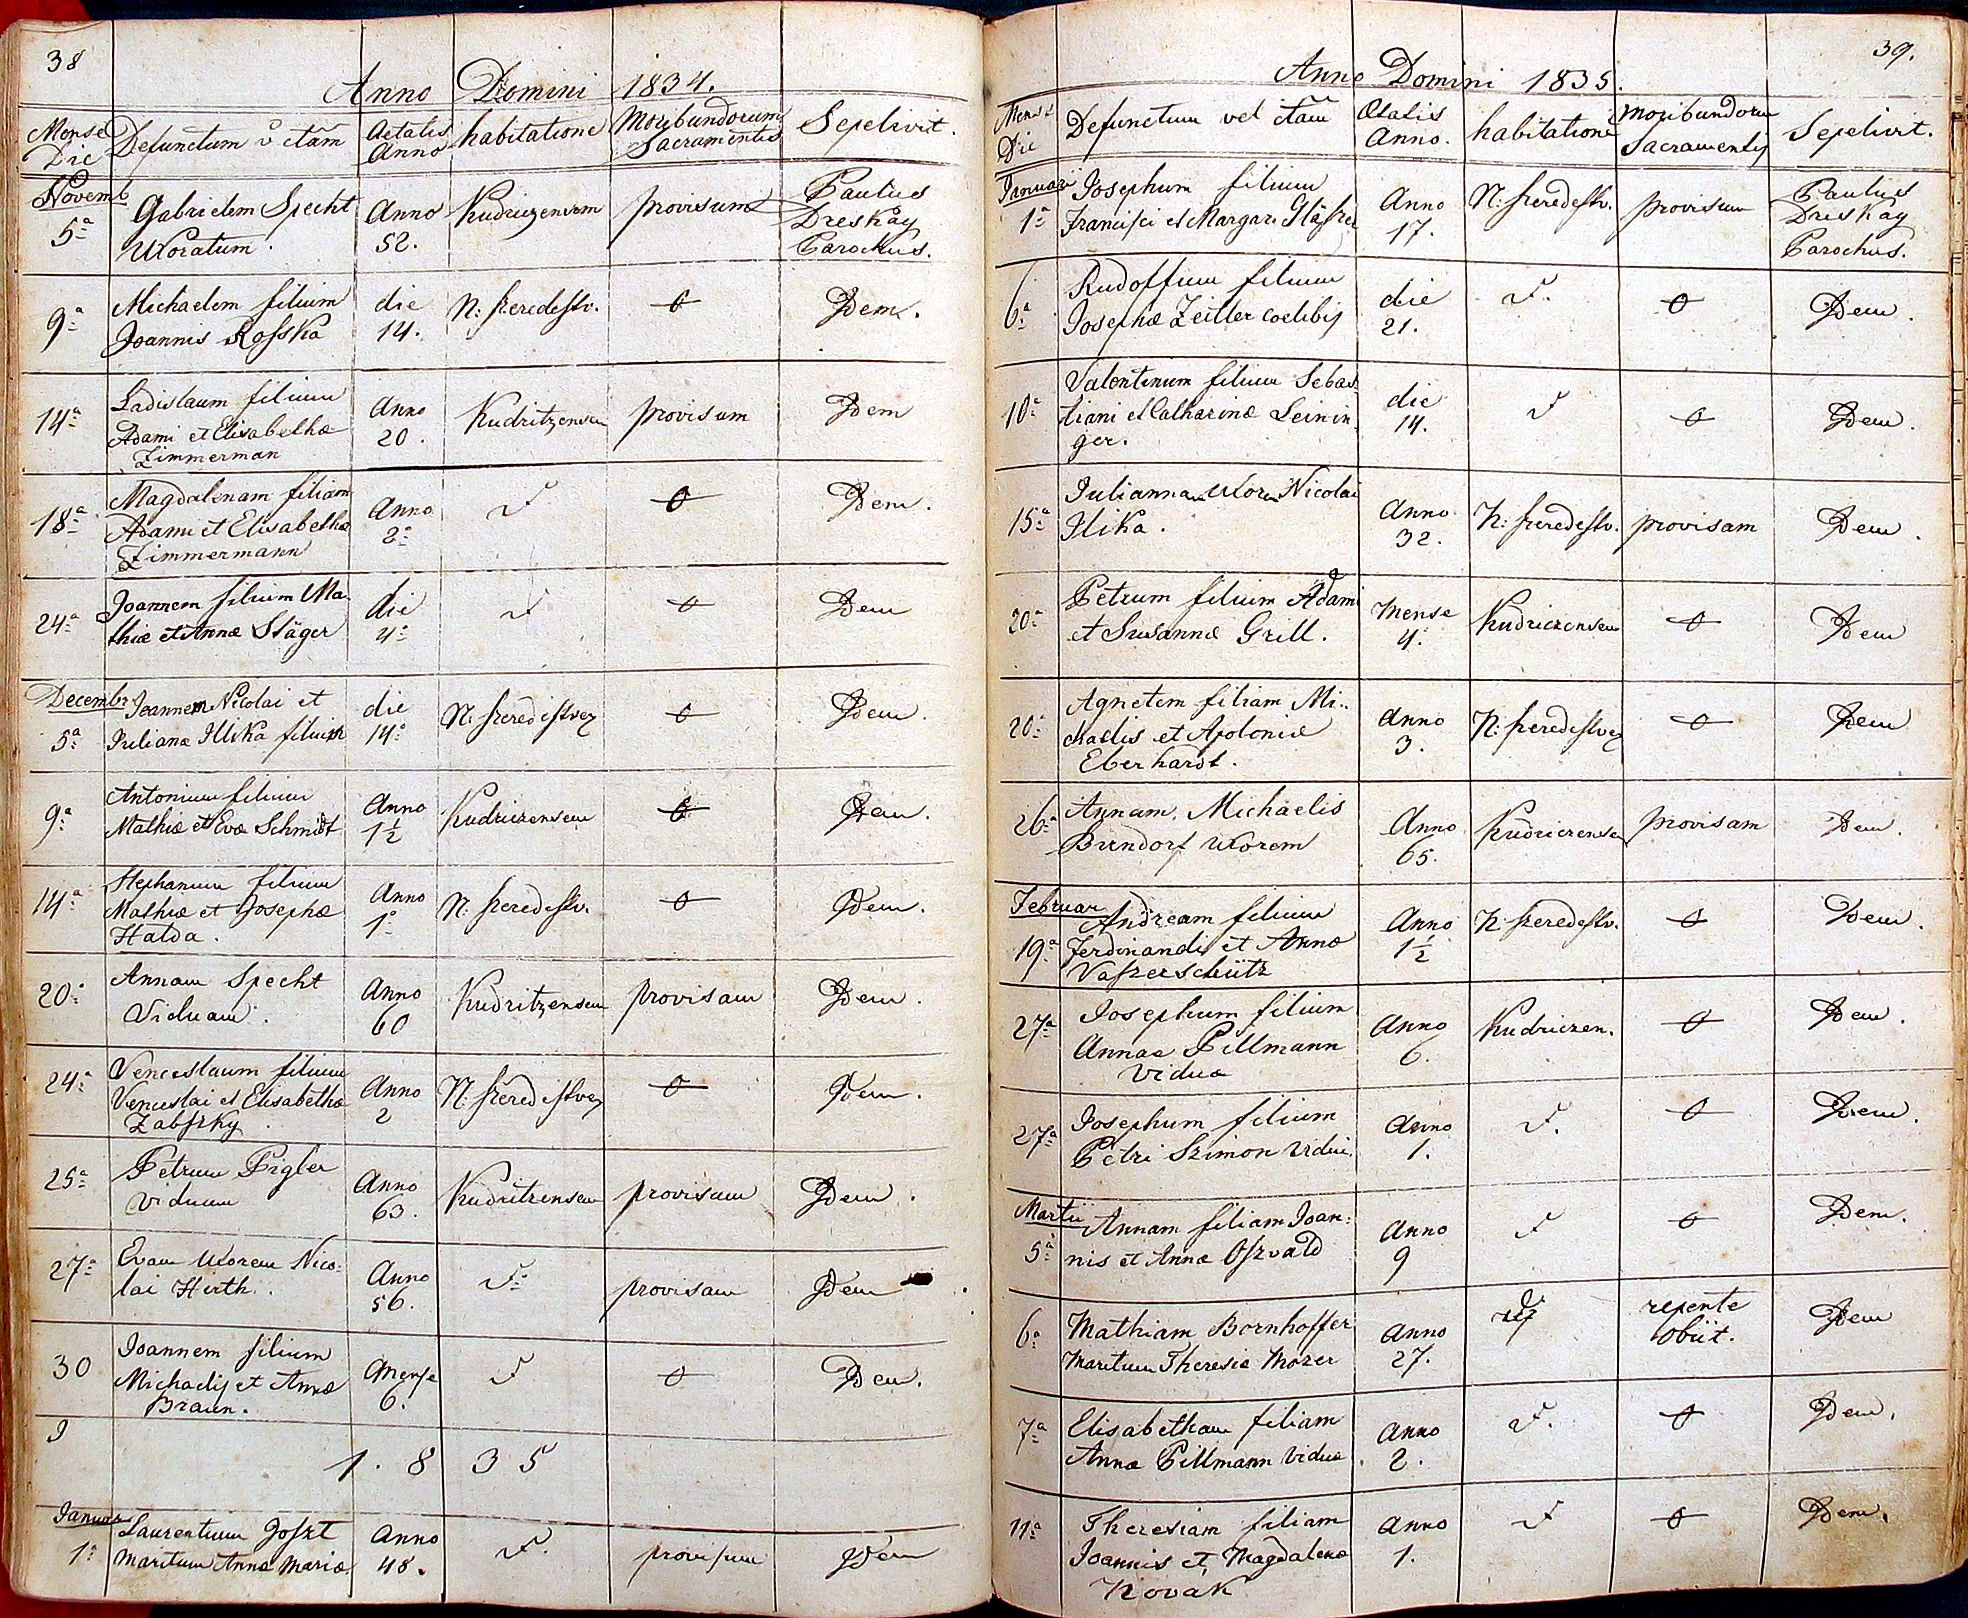 images/church_records/DEATHS/1742-1775D/038 i 039